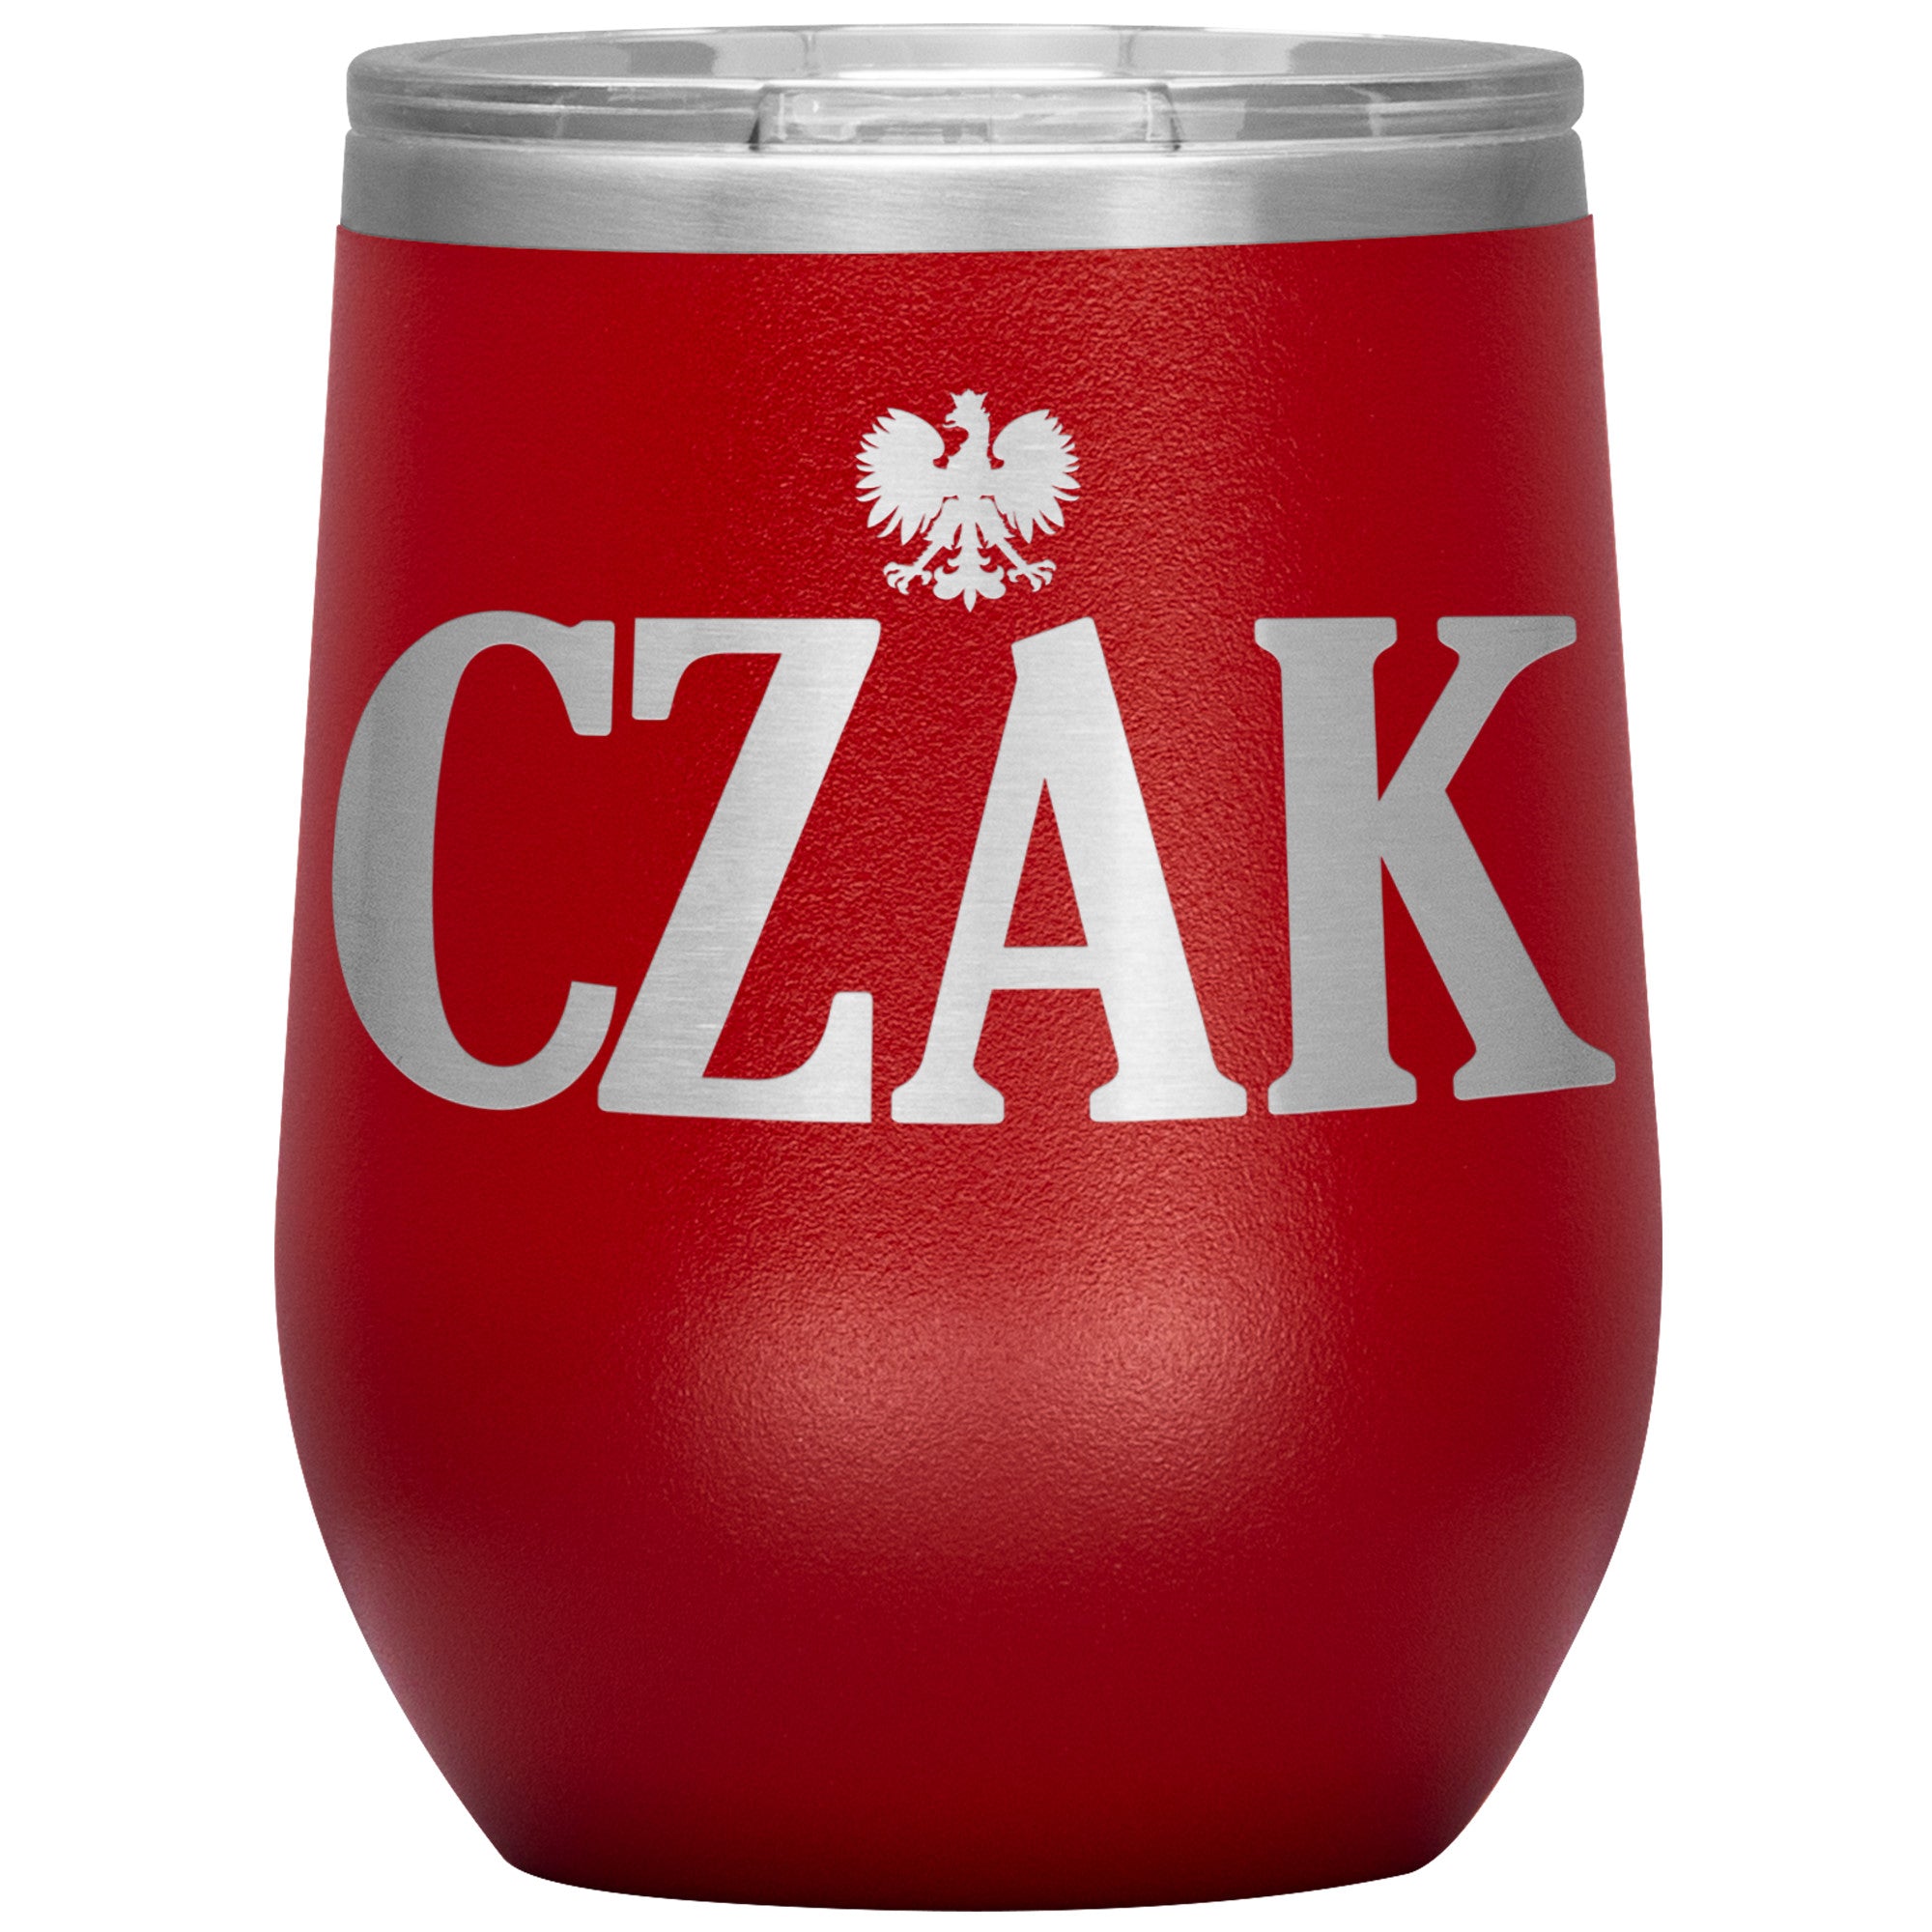 Polish Surnames Ending In CZAK Insulated Wine Tumbler Tumblers teelaunch Red  